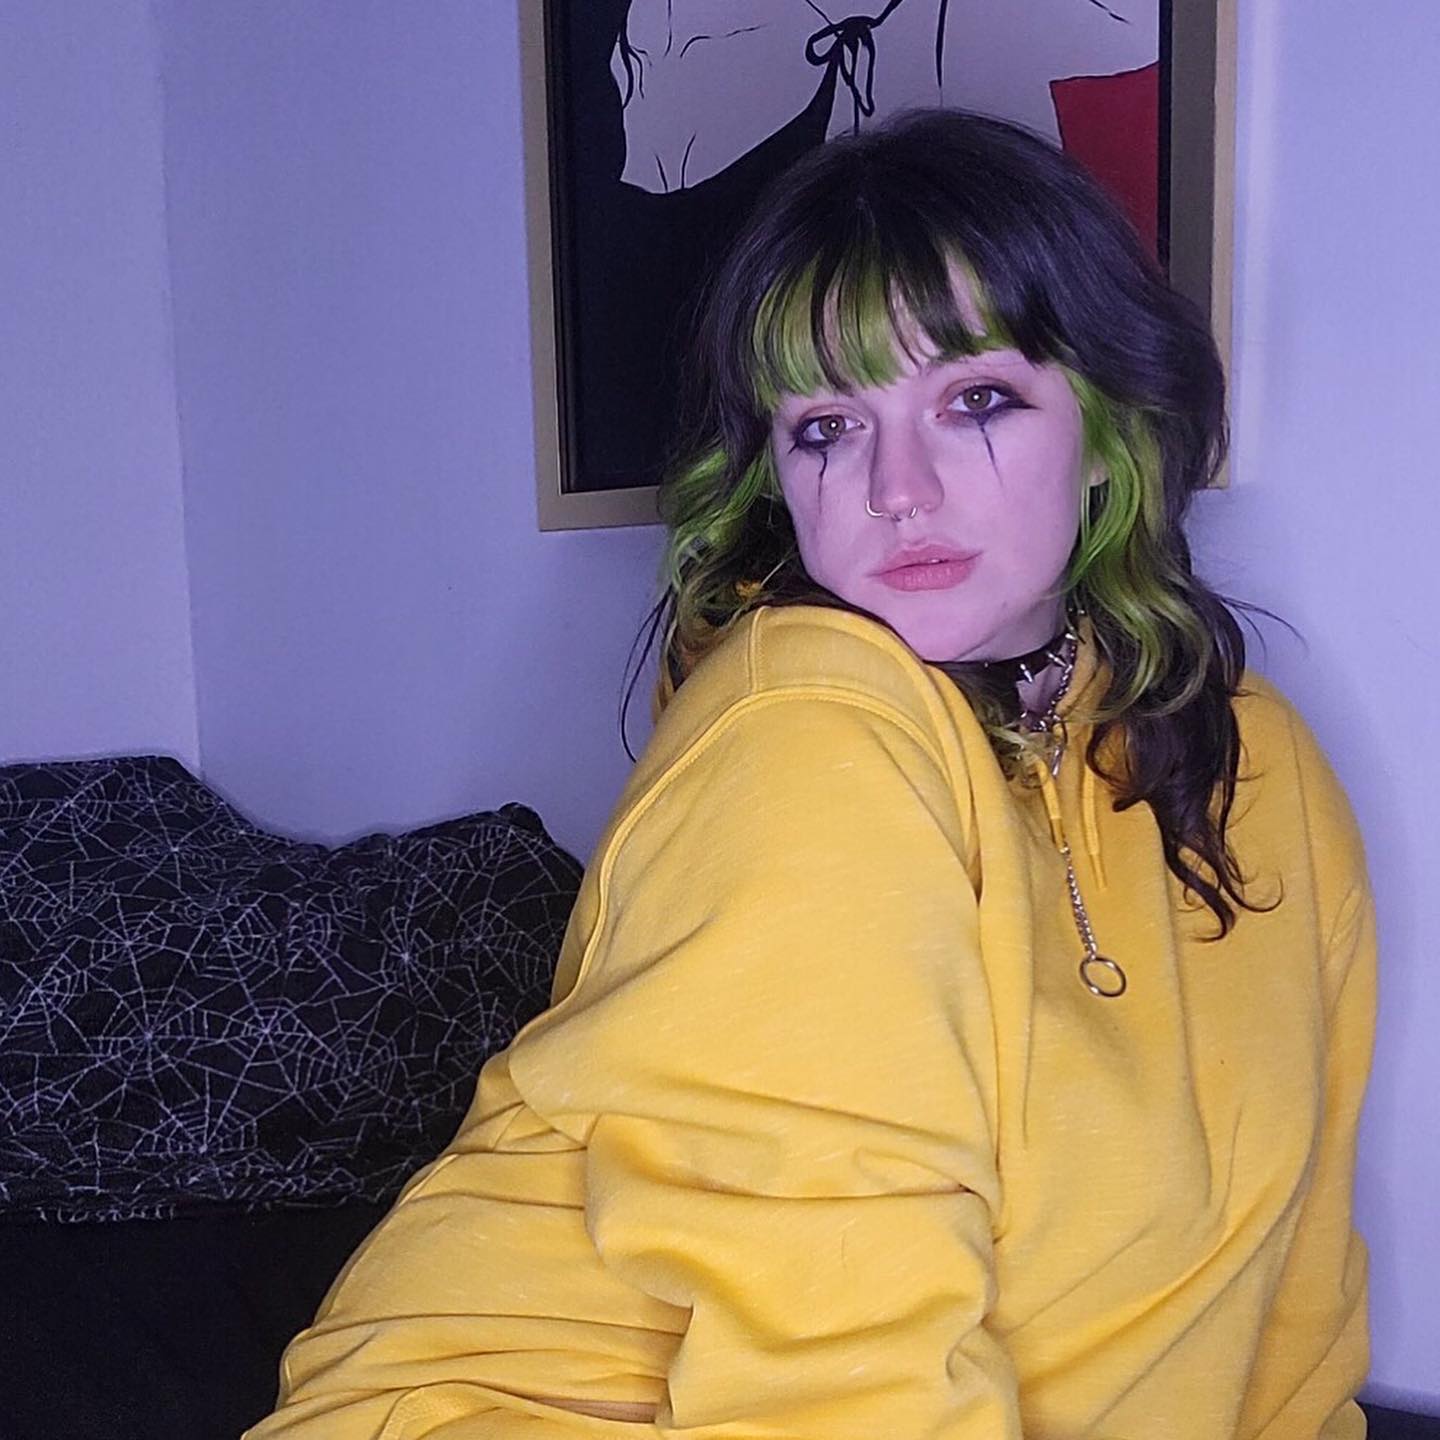 Do I look like Georgie from IT 🎈 with this yellow 🟡sweater 🟡 Open and shut case here,, you like goth alt baddies huhh?? Figured, not that difficult to spot 😘🥵🖤 do me proud and keep this in your memories 

#altgothbaddies #baddies #onlyfansgirls #efirl #tiktokthots #thiktok #gamergirl #catgirl #goththot #gothmom #altbaddie